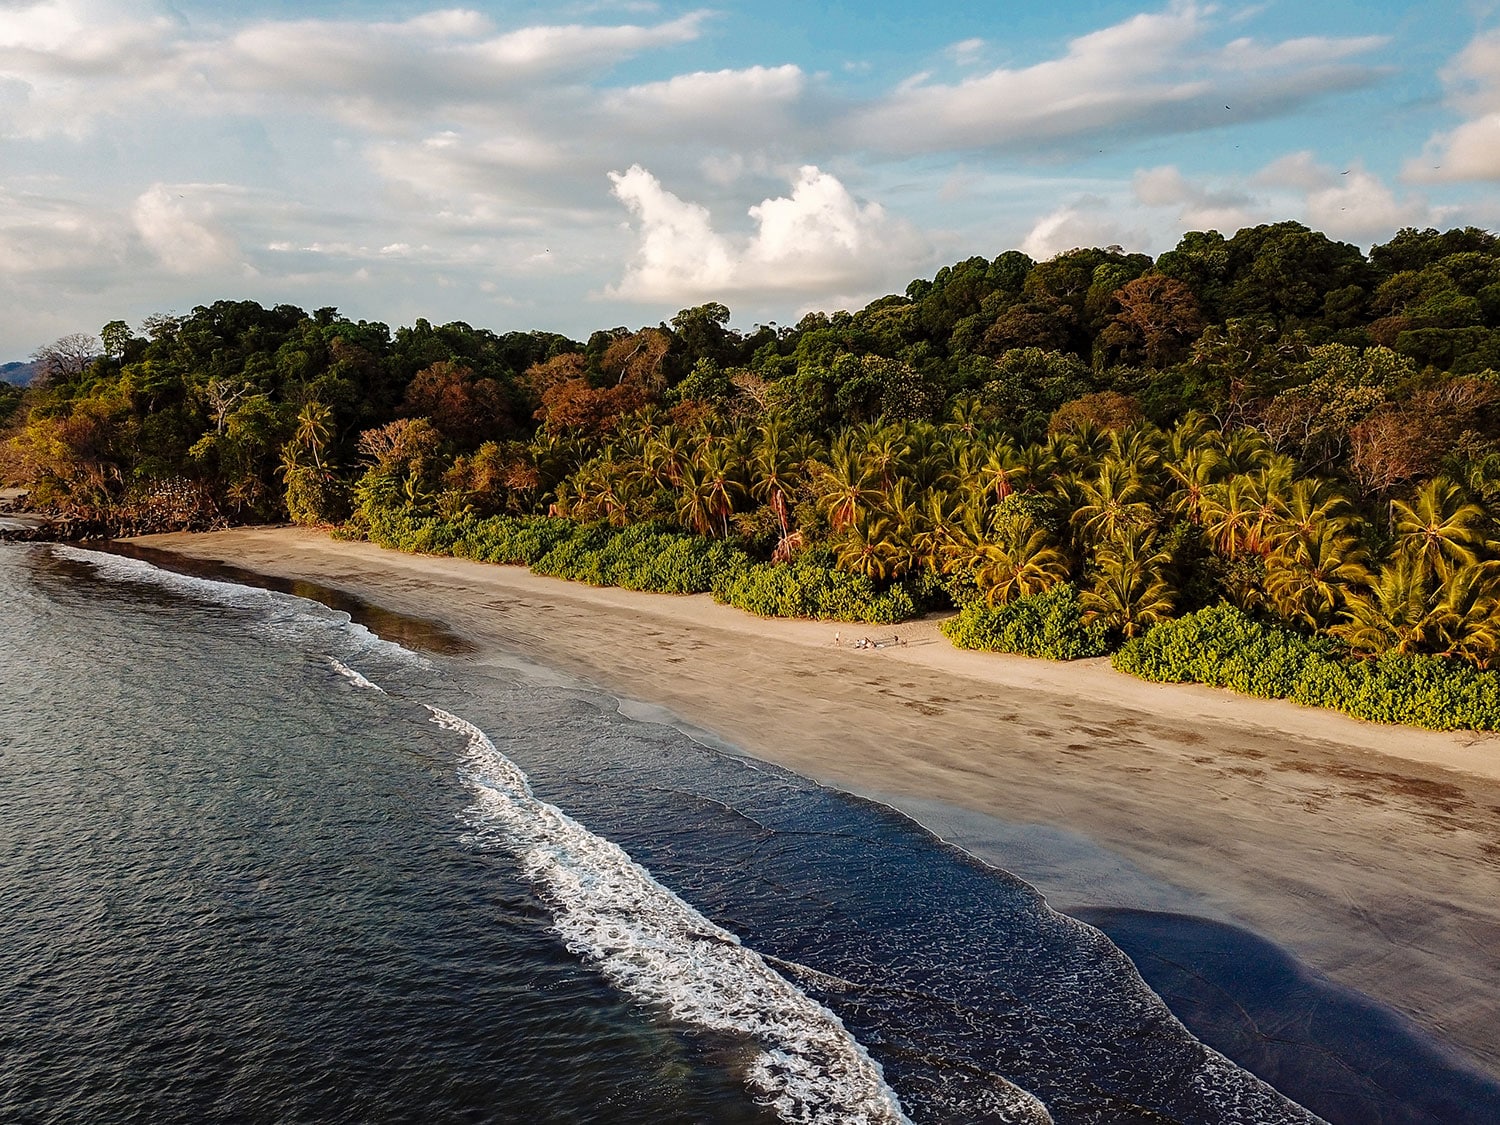 Isla Palenque in Panama is devoted to sustainability and keeping the natural elements protected.